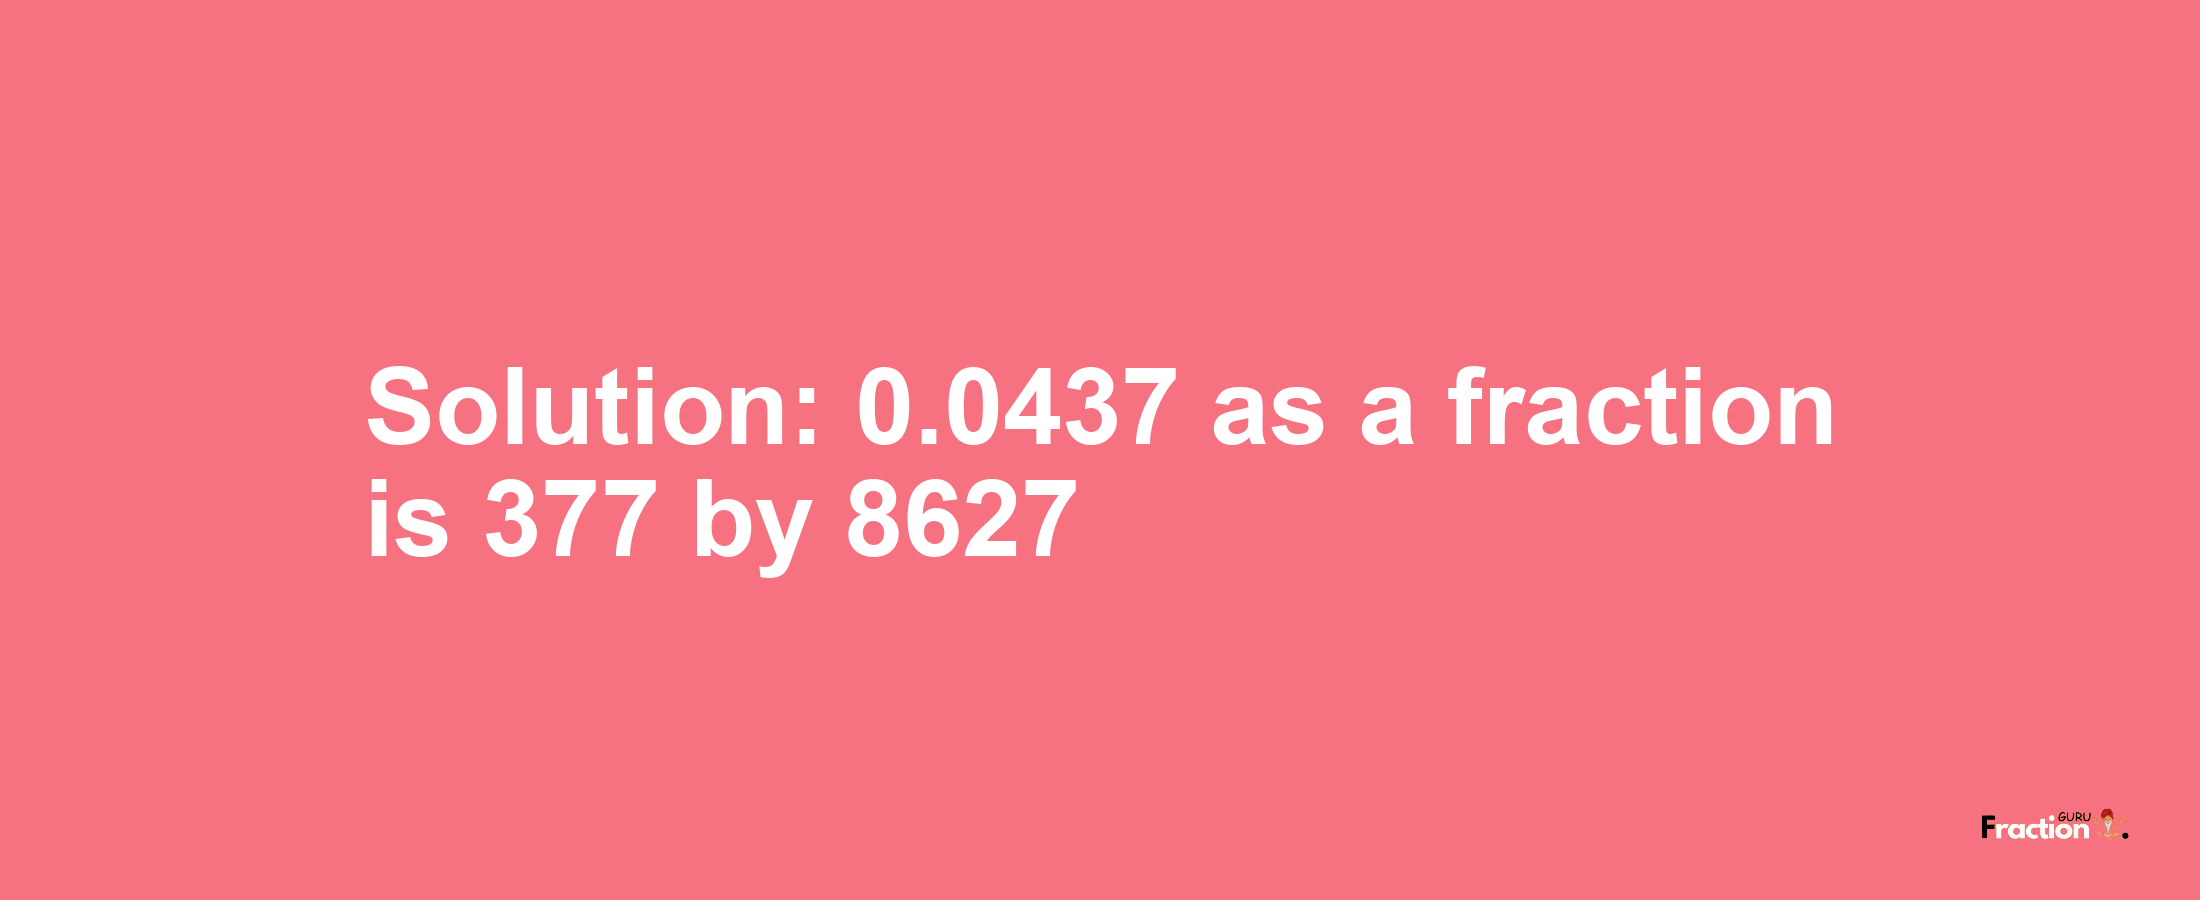 Solution:0.0437 as a fraction is 377/8627